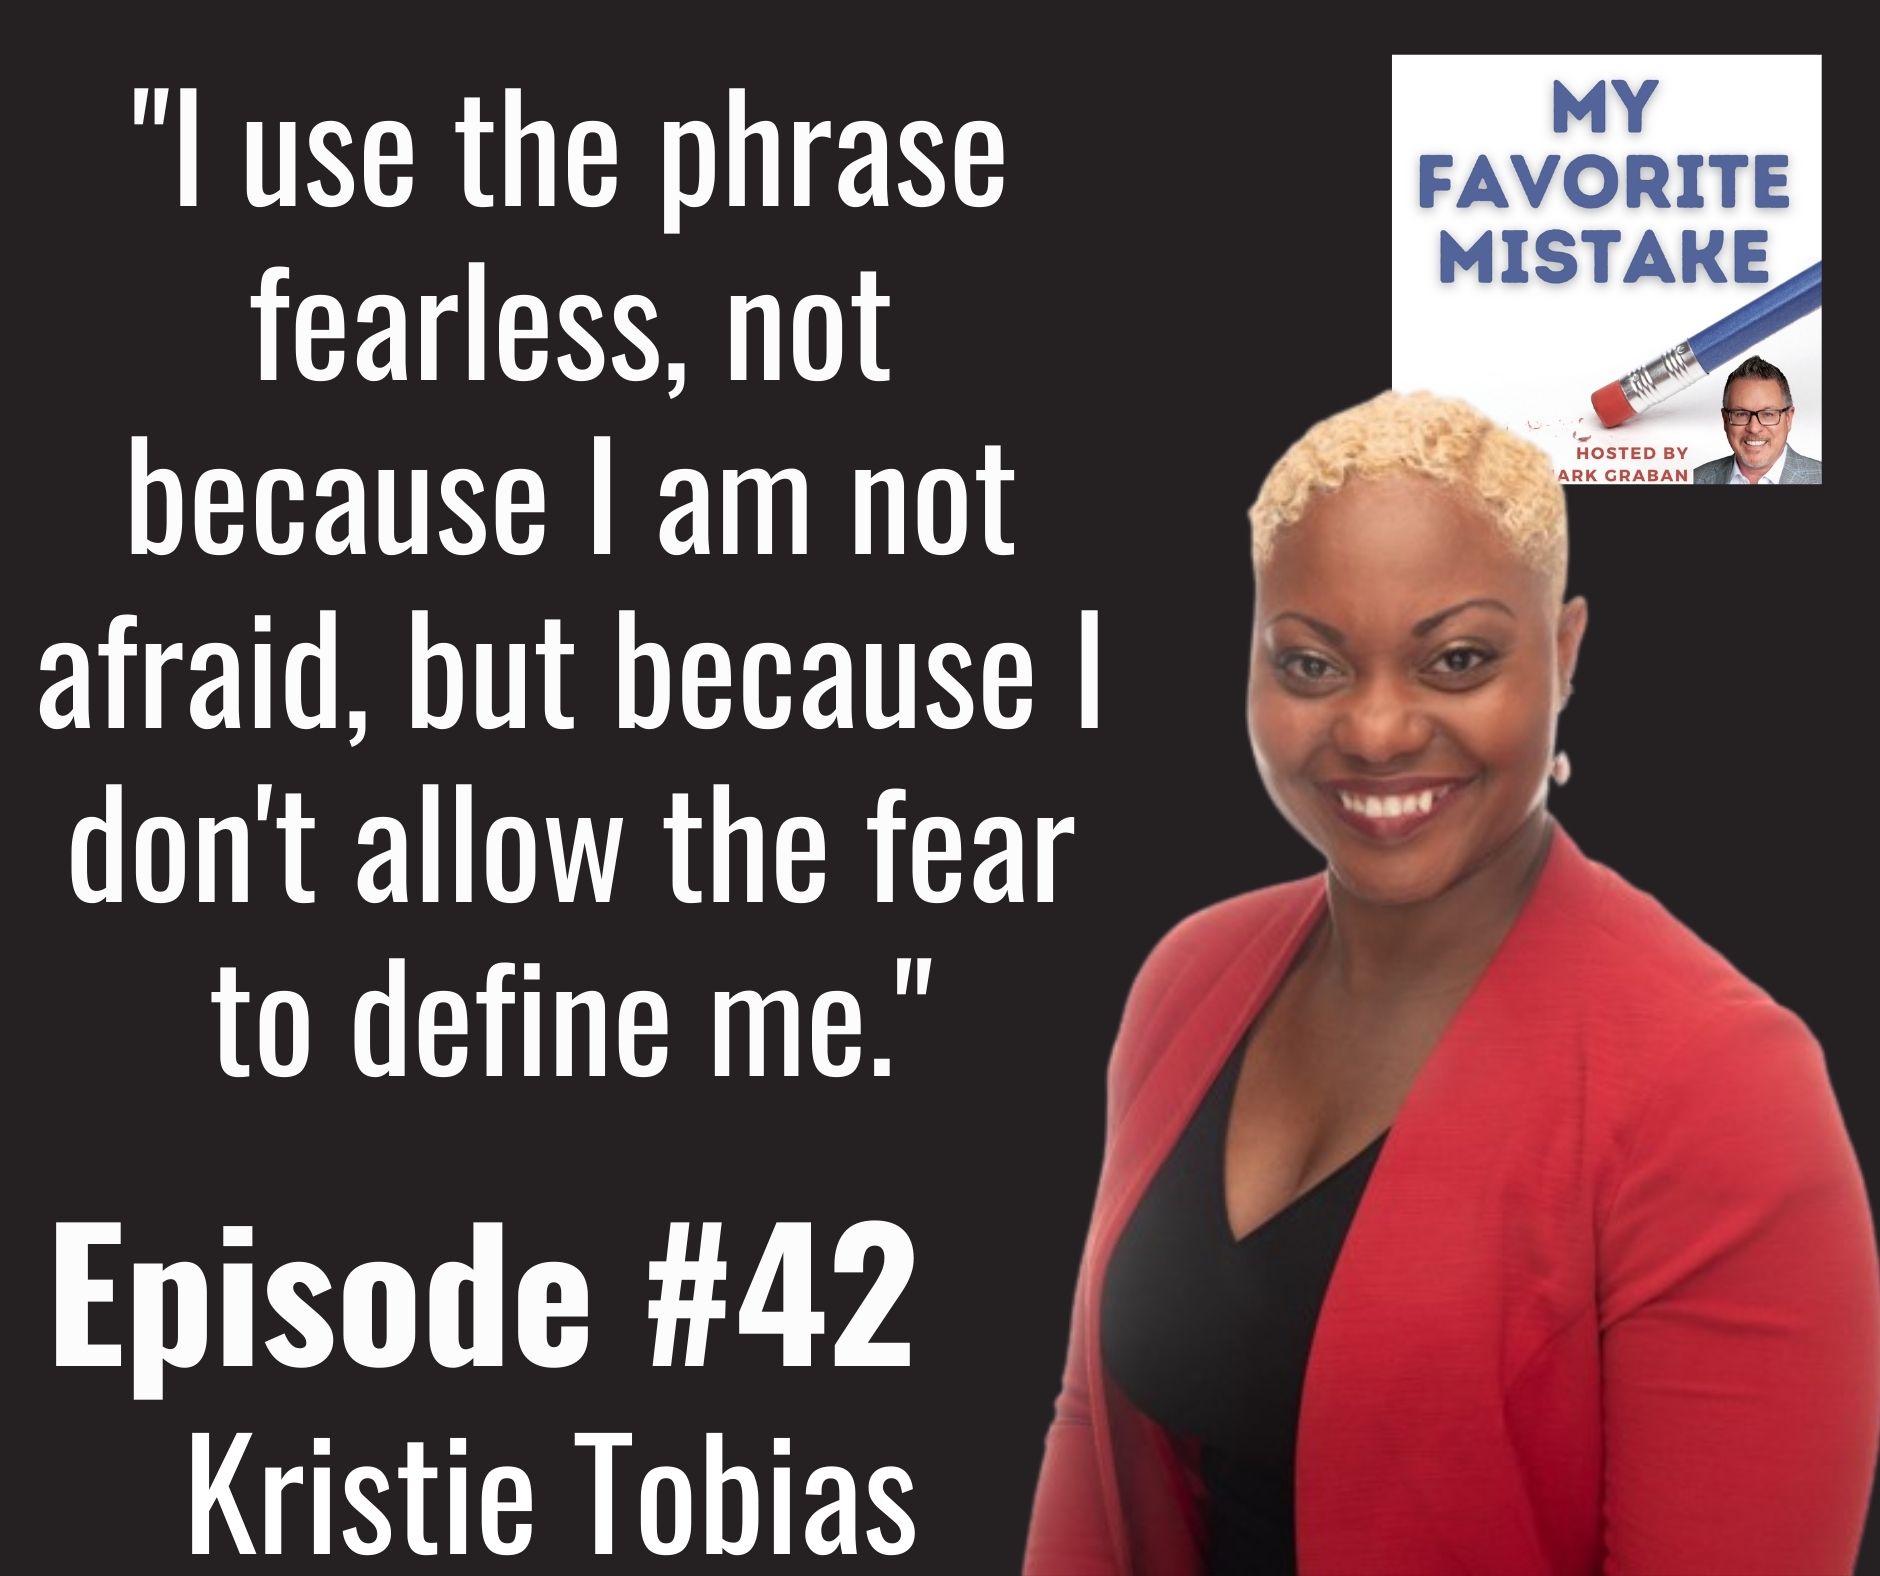 "I use the phrase fearless, not because I am not afraid, but because I don't allow the fear to define me."